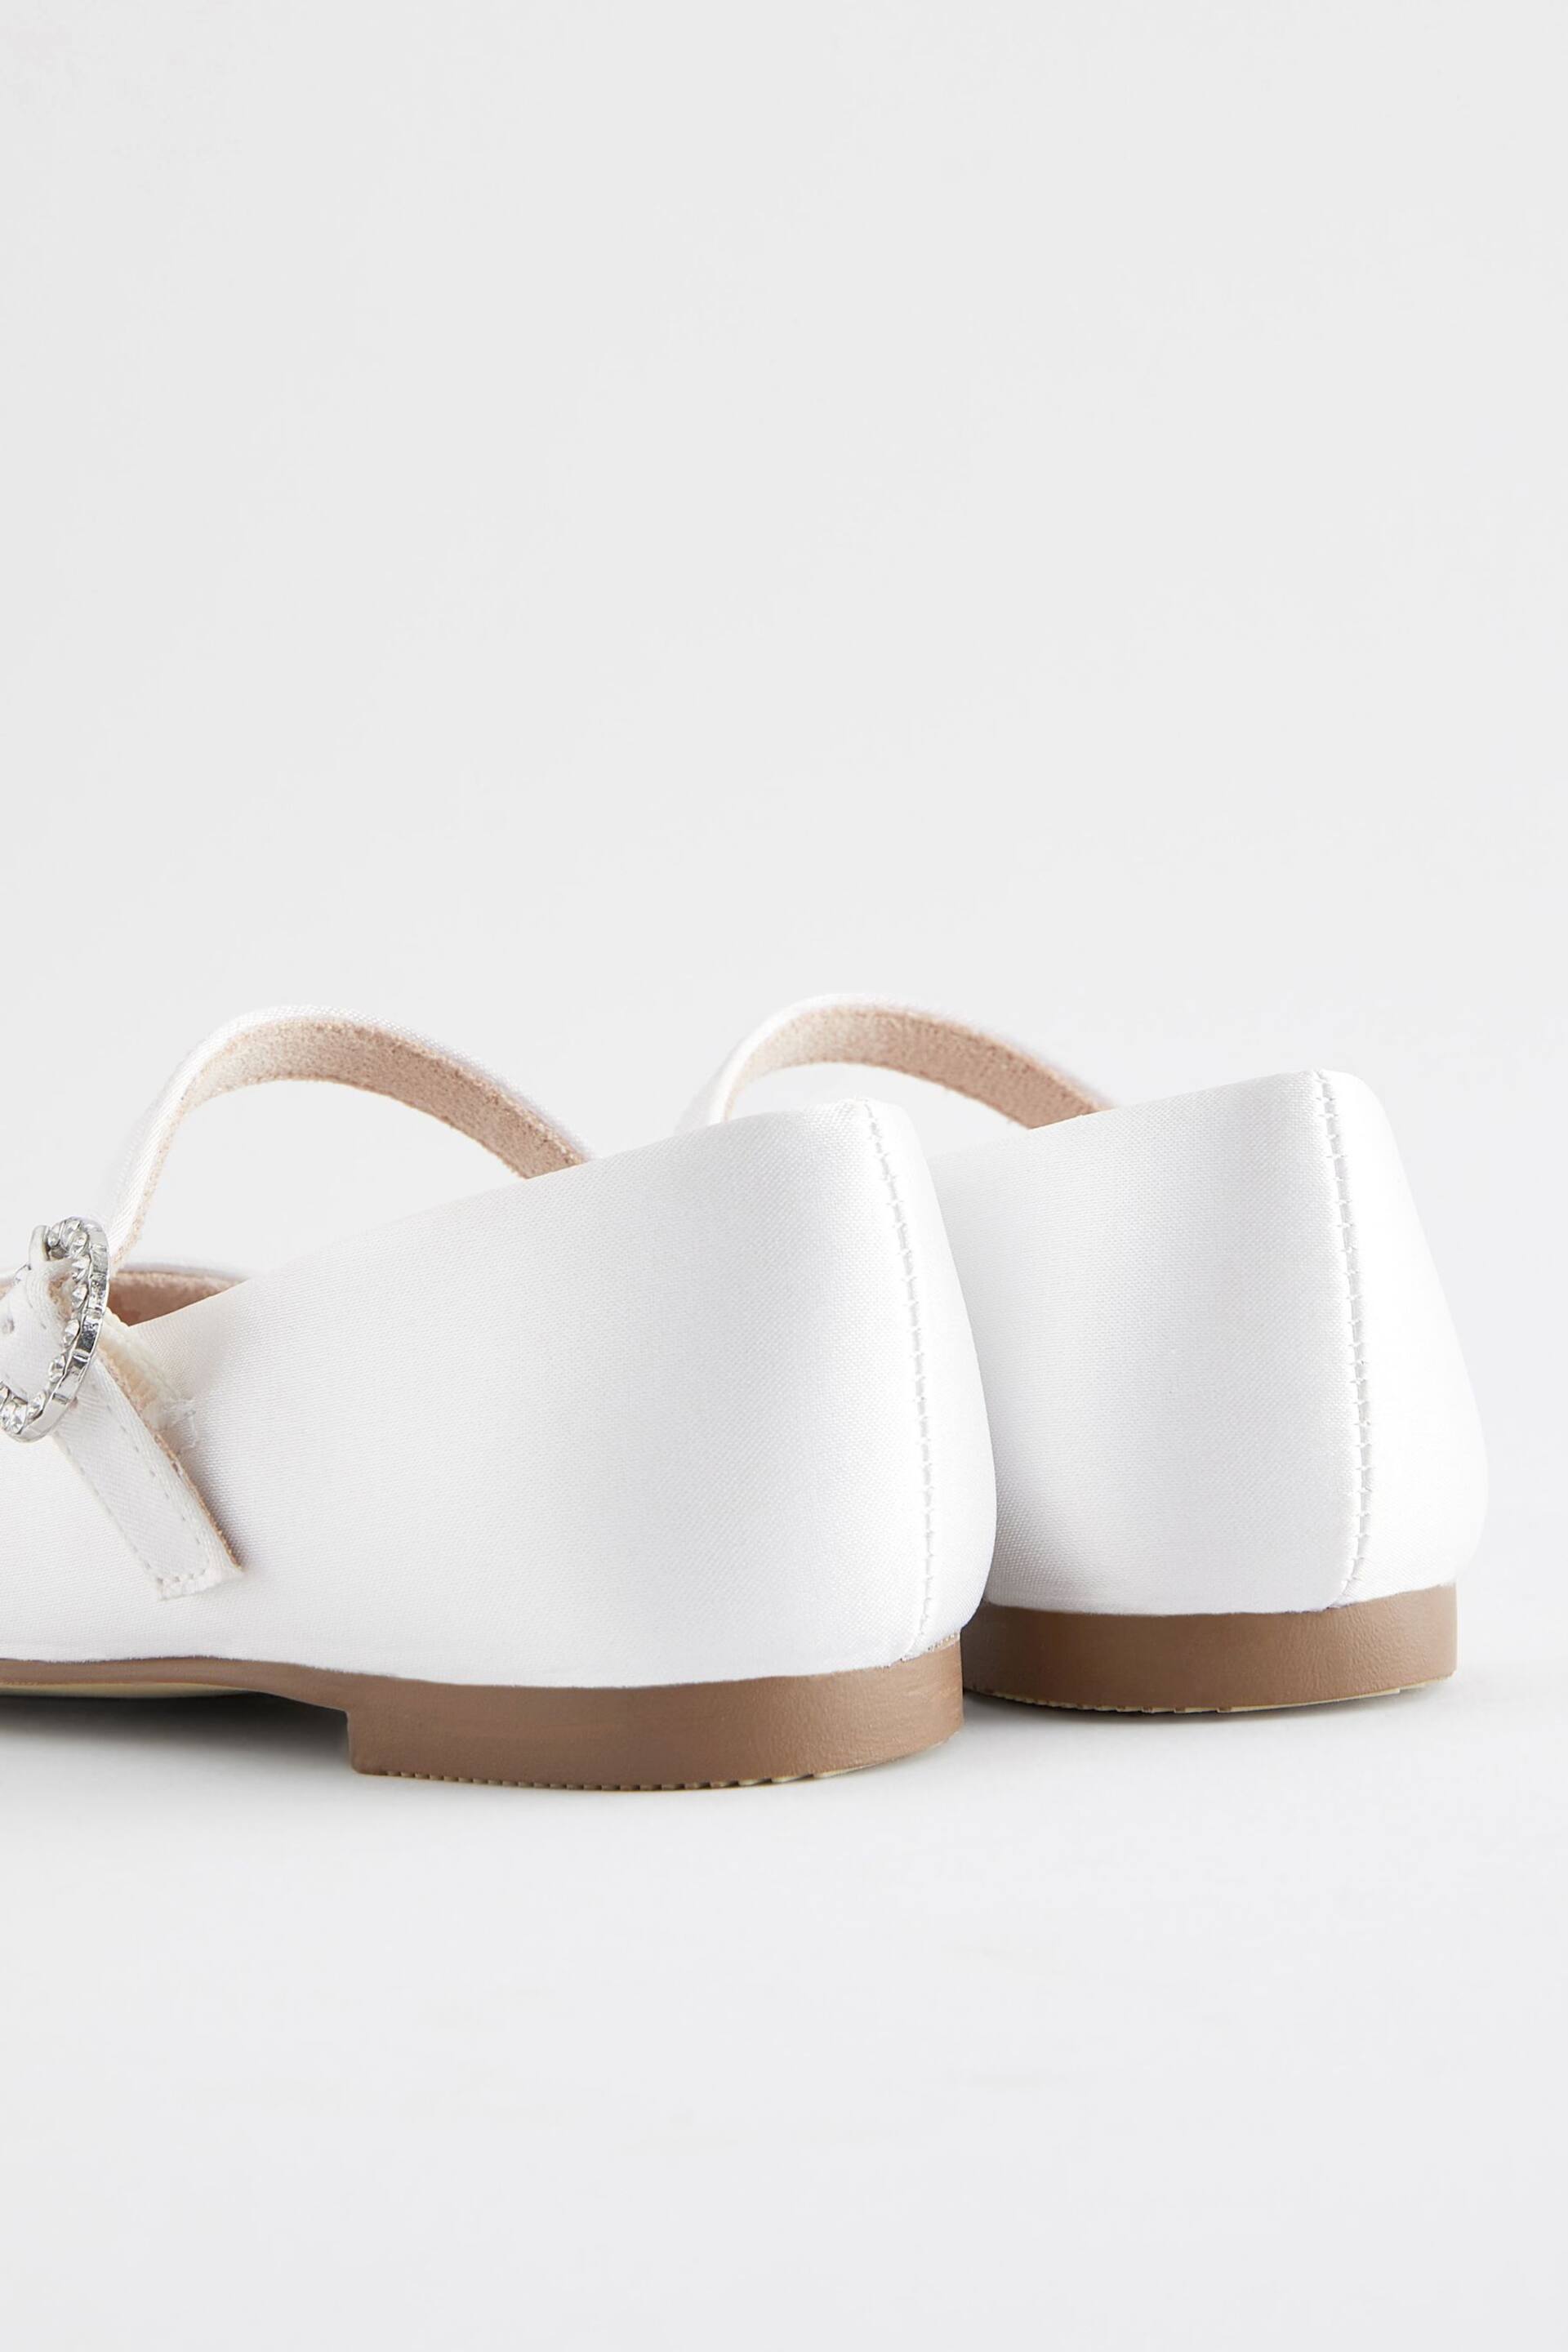 White Wide Fit (G) Bridesmaid Occasion Mary Jane Shoes - Image 4 of 5